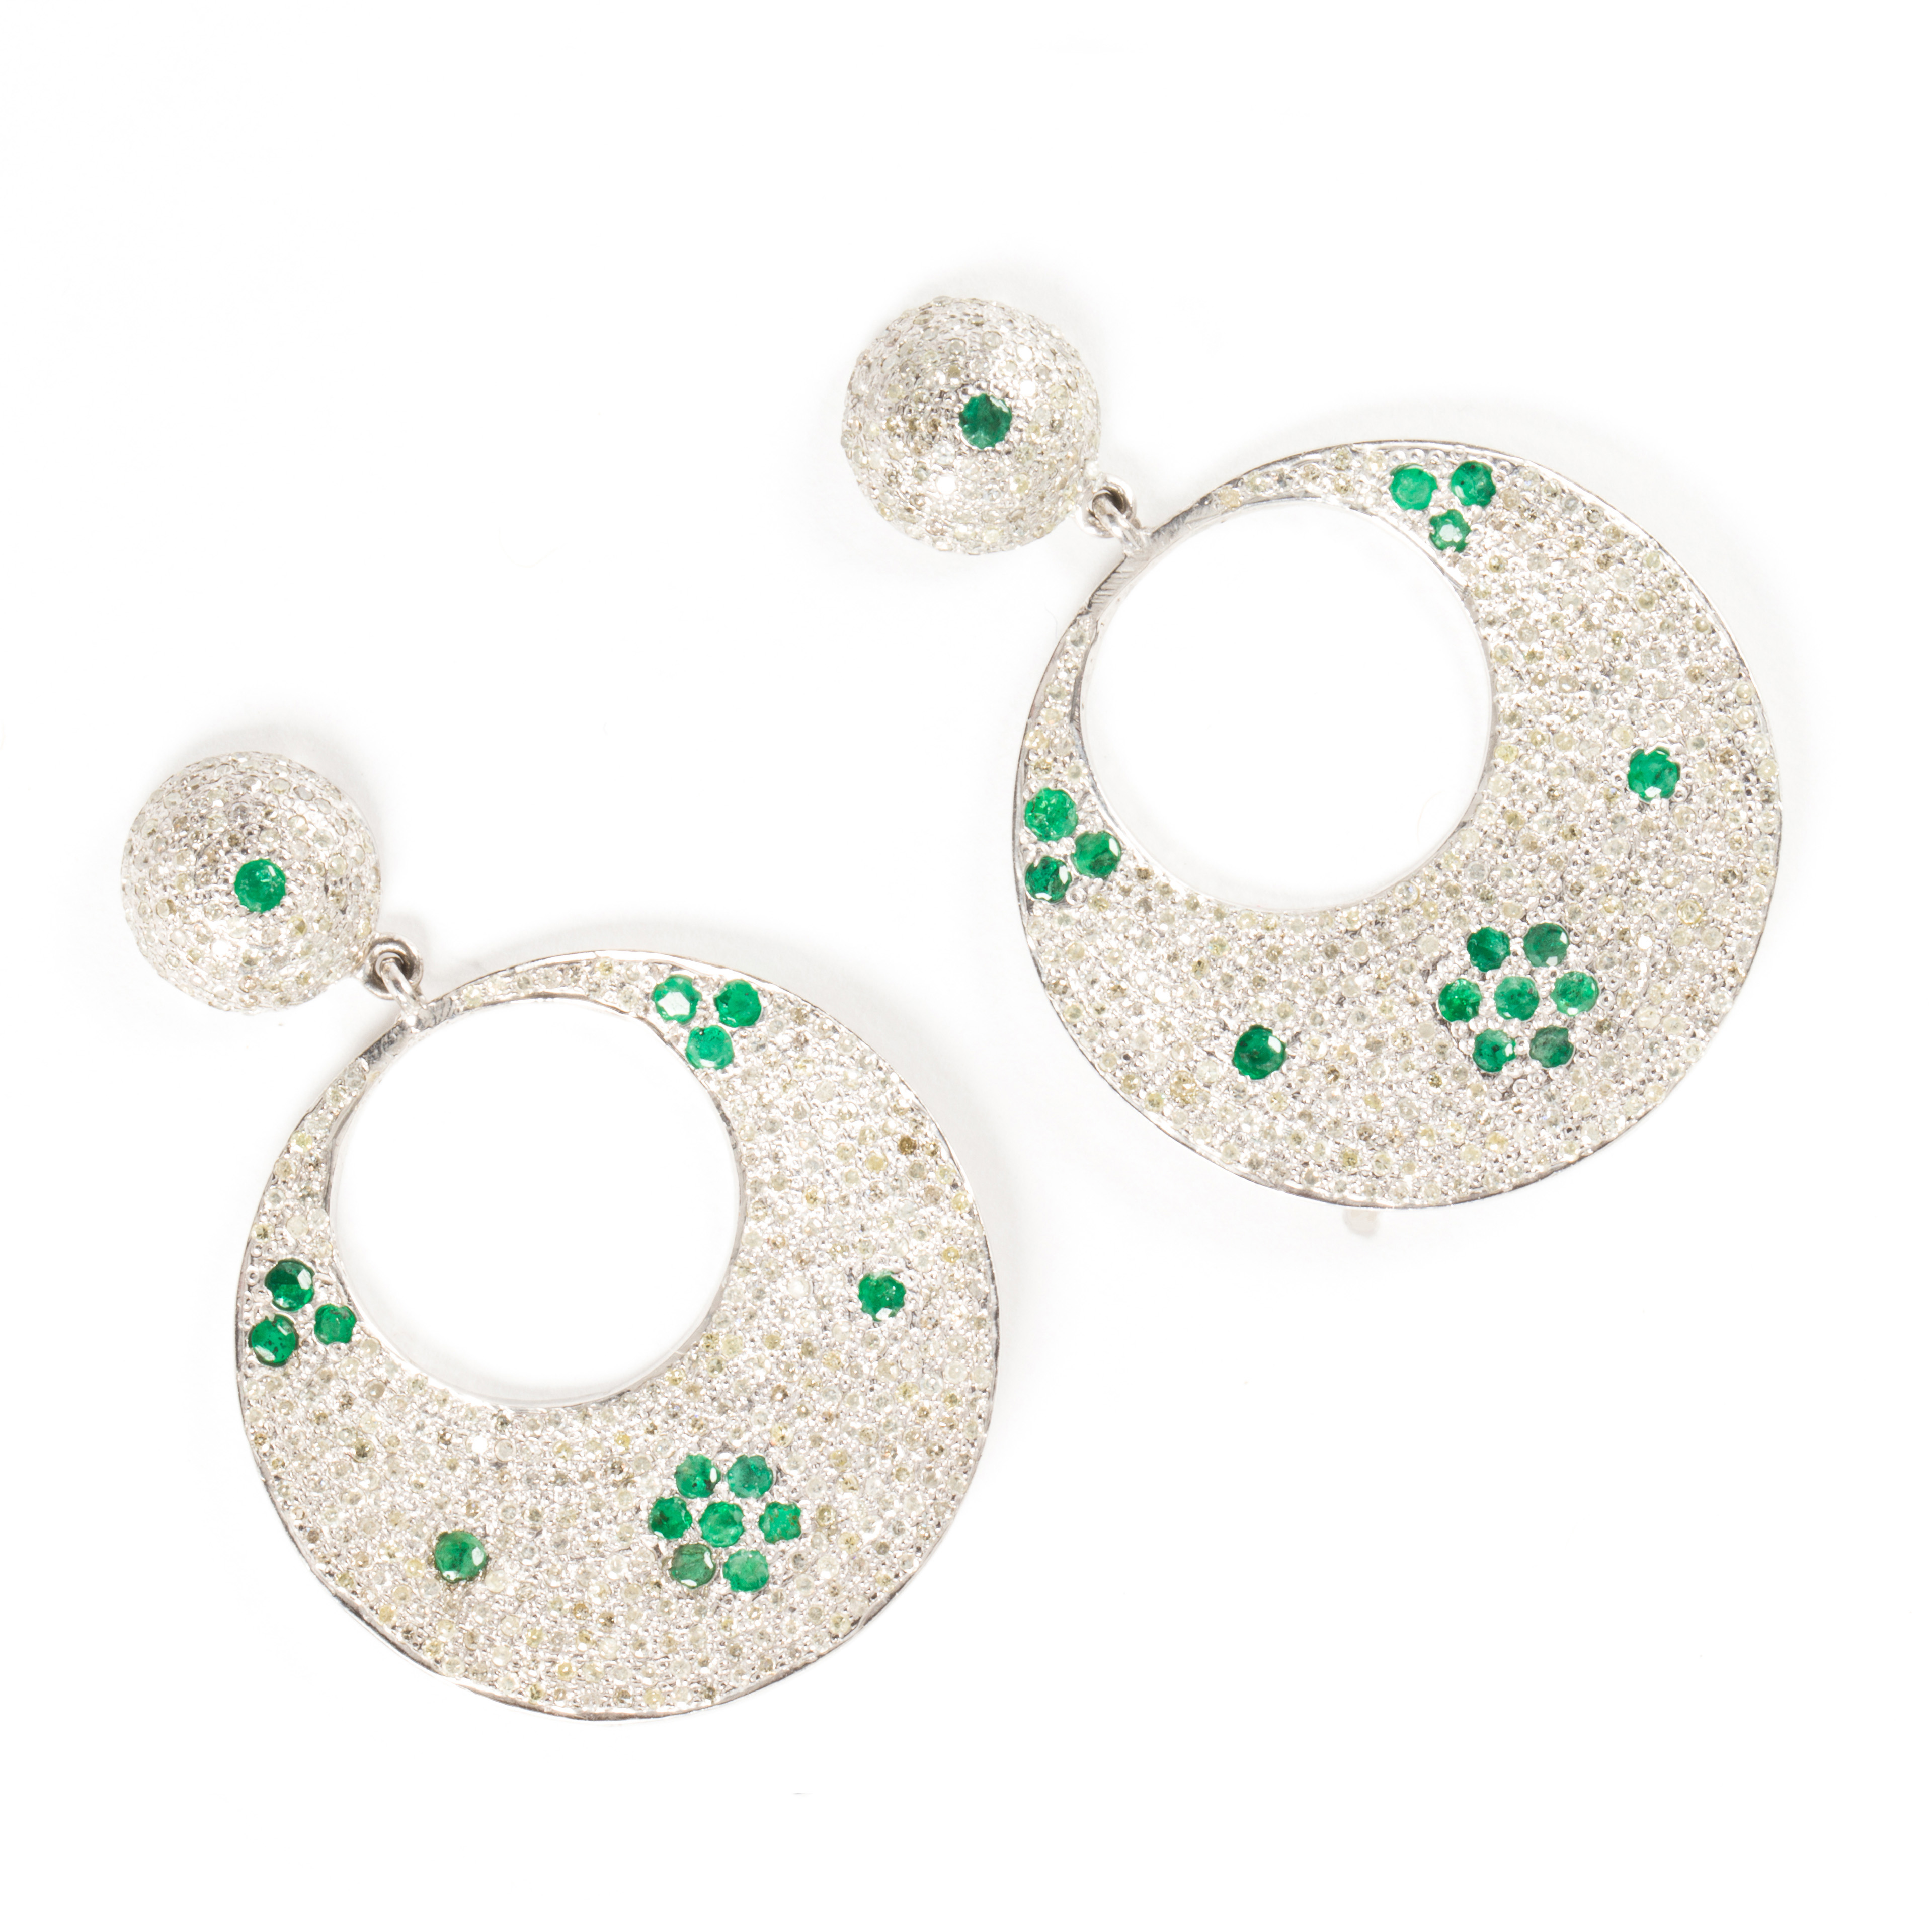 A PAIR OF DIAMOND AND EMERALD EARRINGS 3a4c01